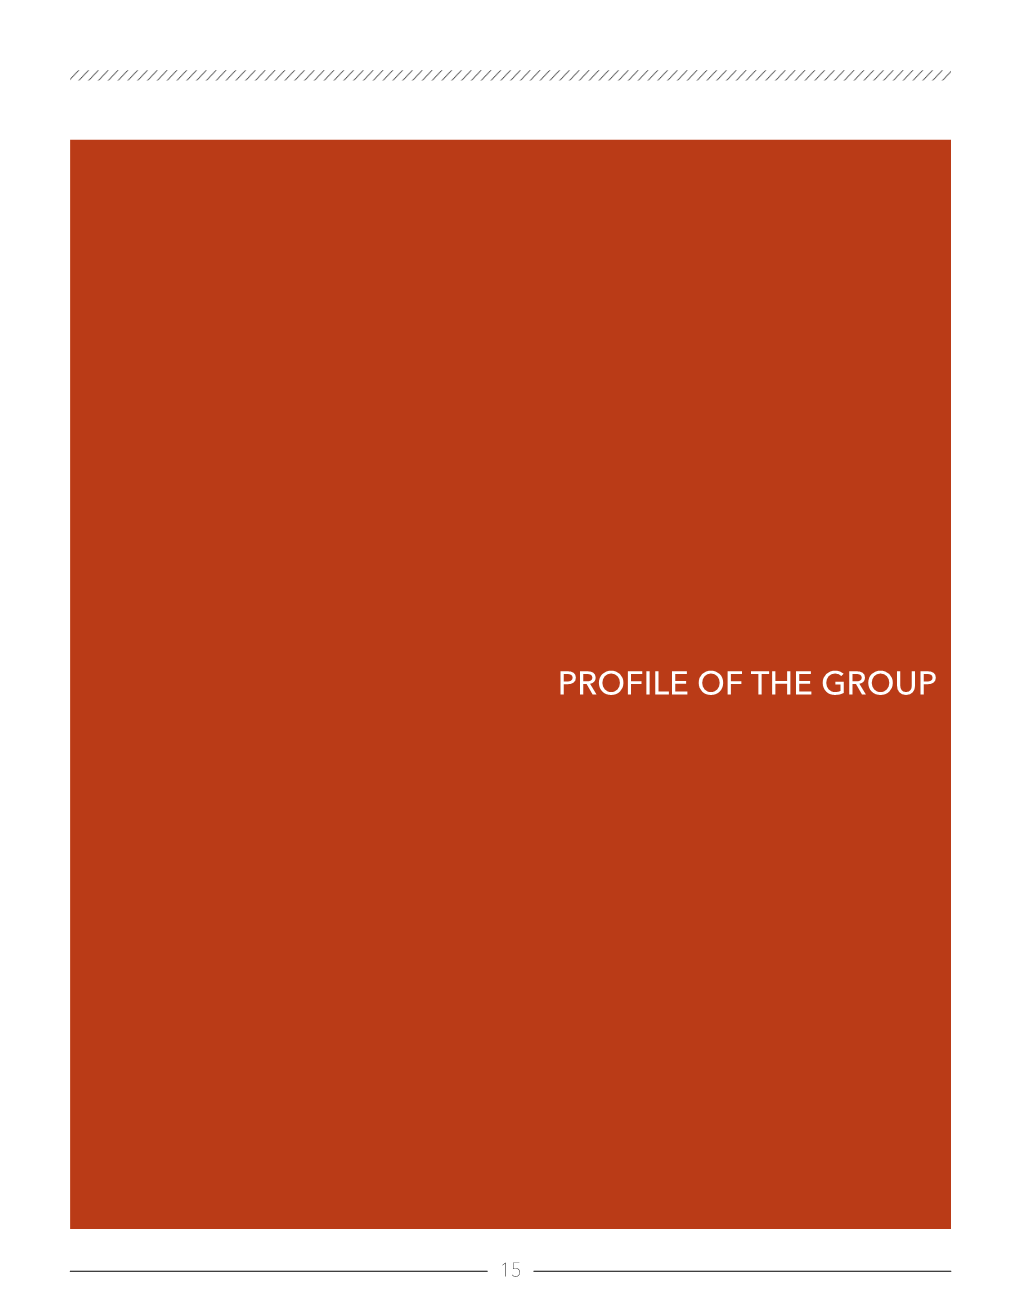 Profile of the Group